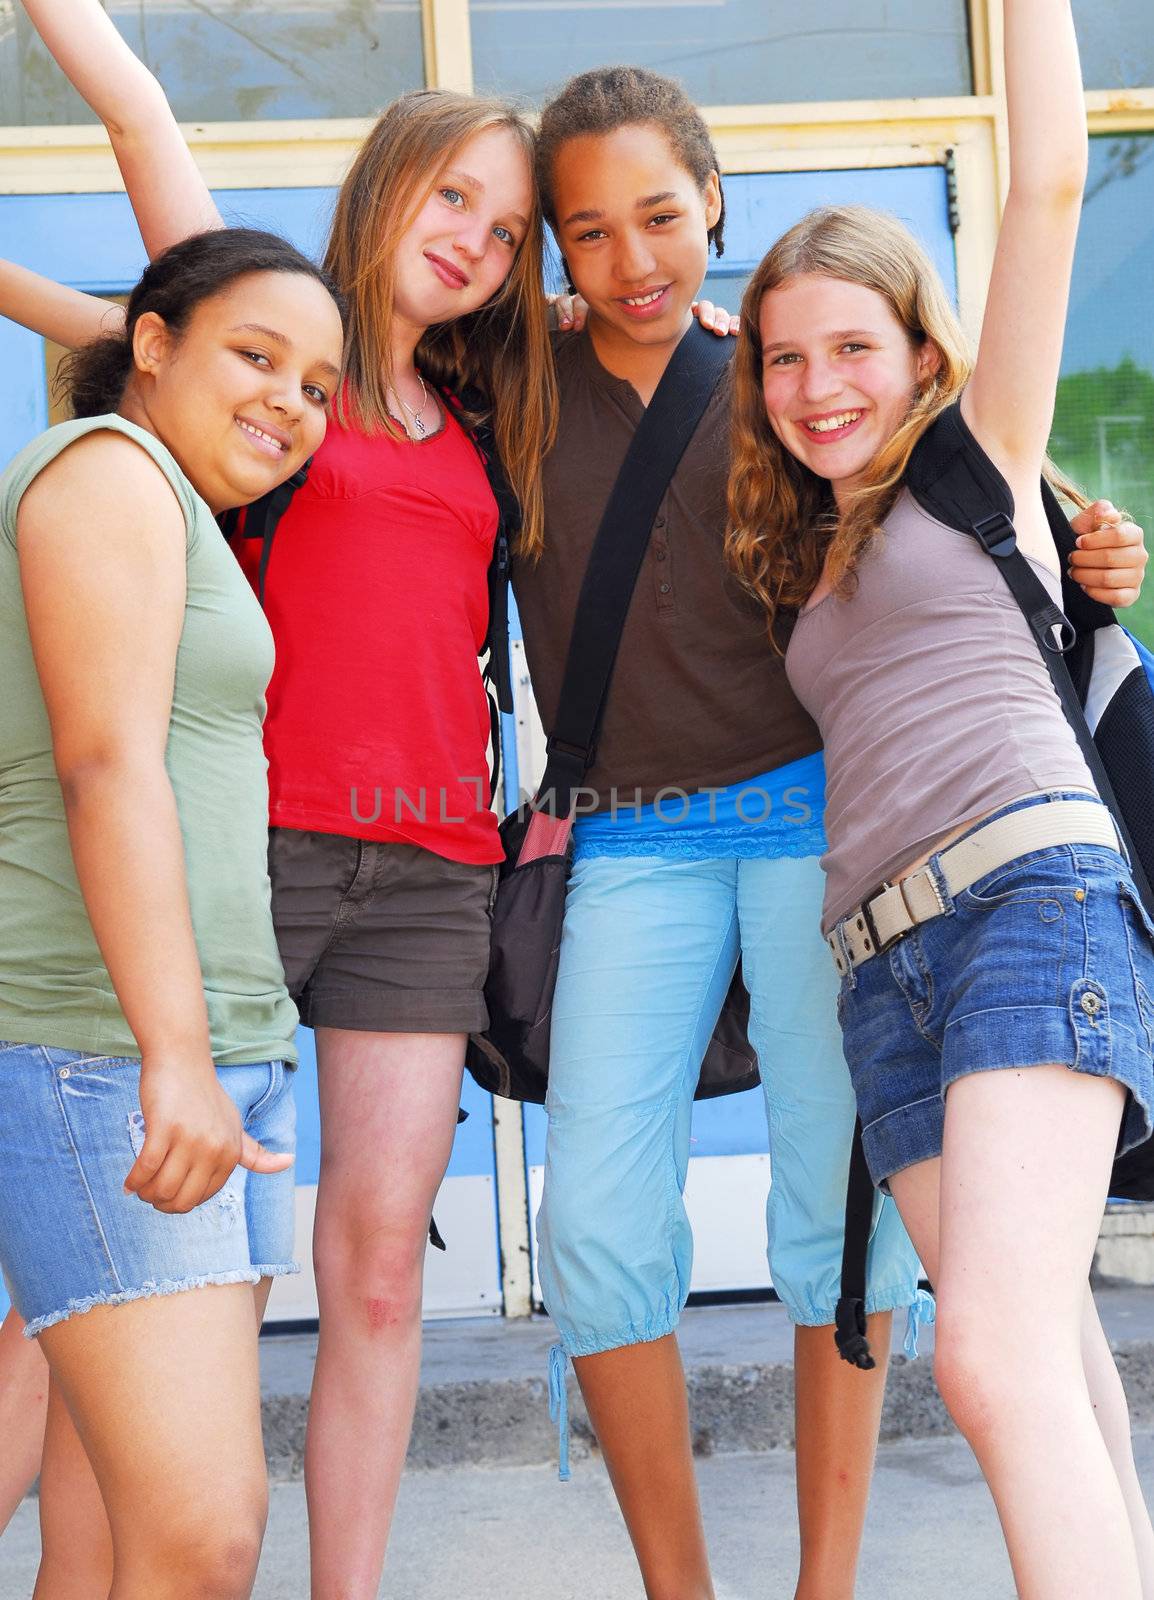 Portrait of a group of four young girls near school building